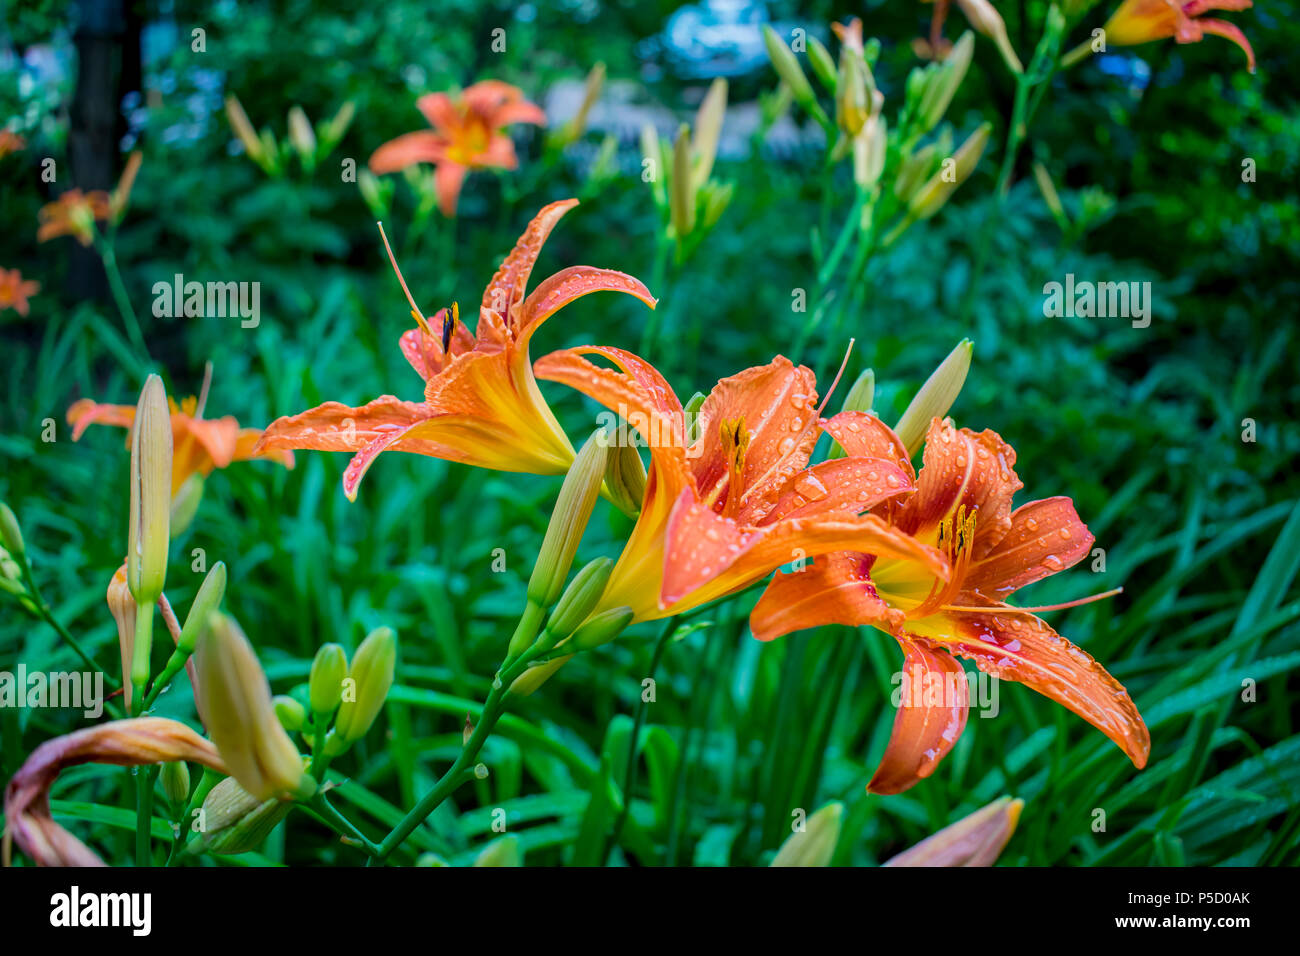 lily flowers grow in the garden of a summer country house Stock Photo